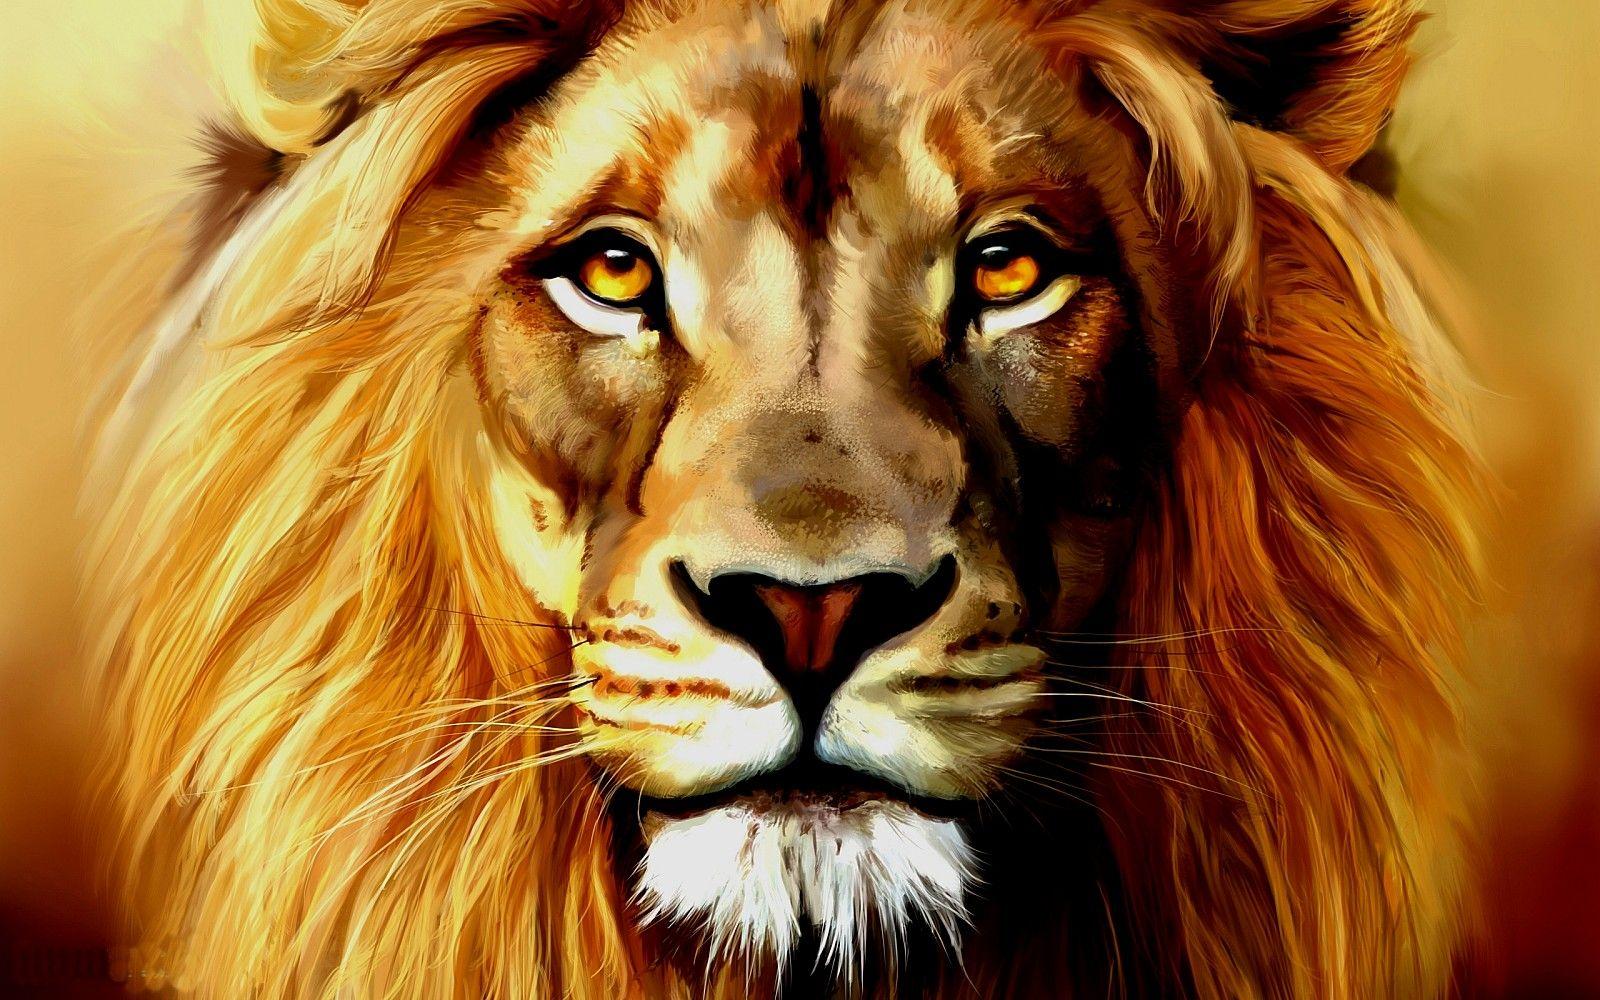 Look into the lion's eyes in these lion wallpaper and feel